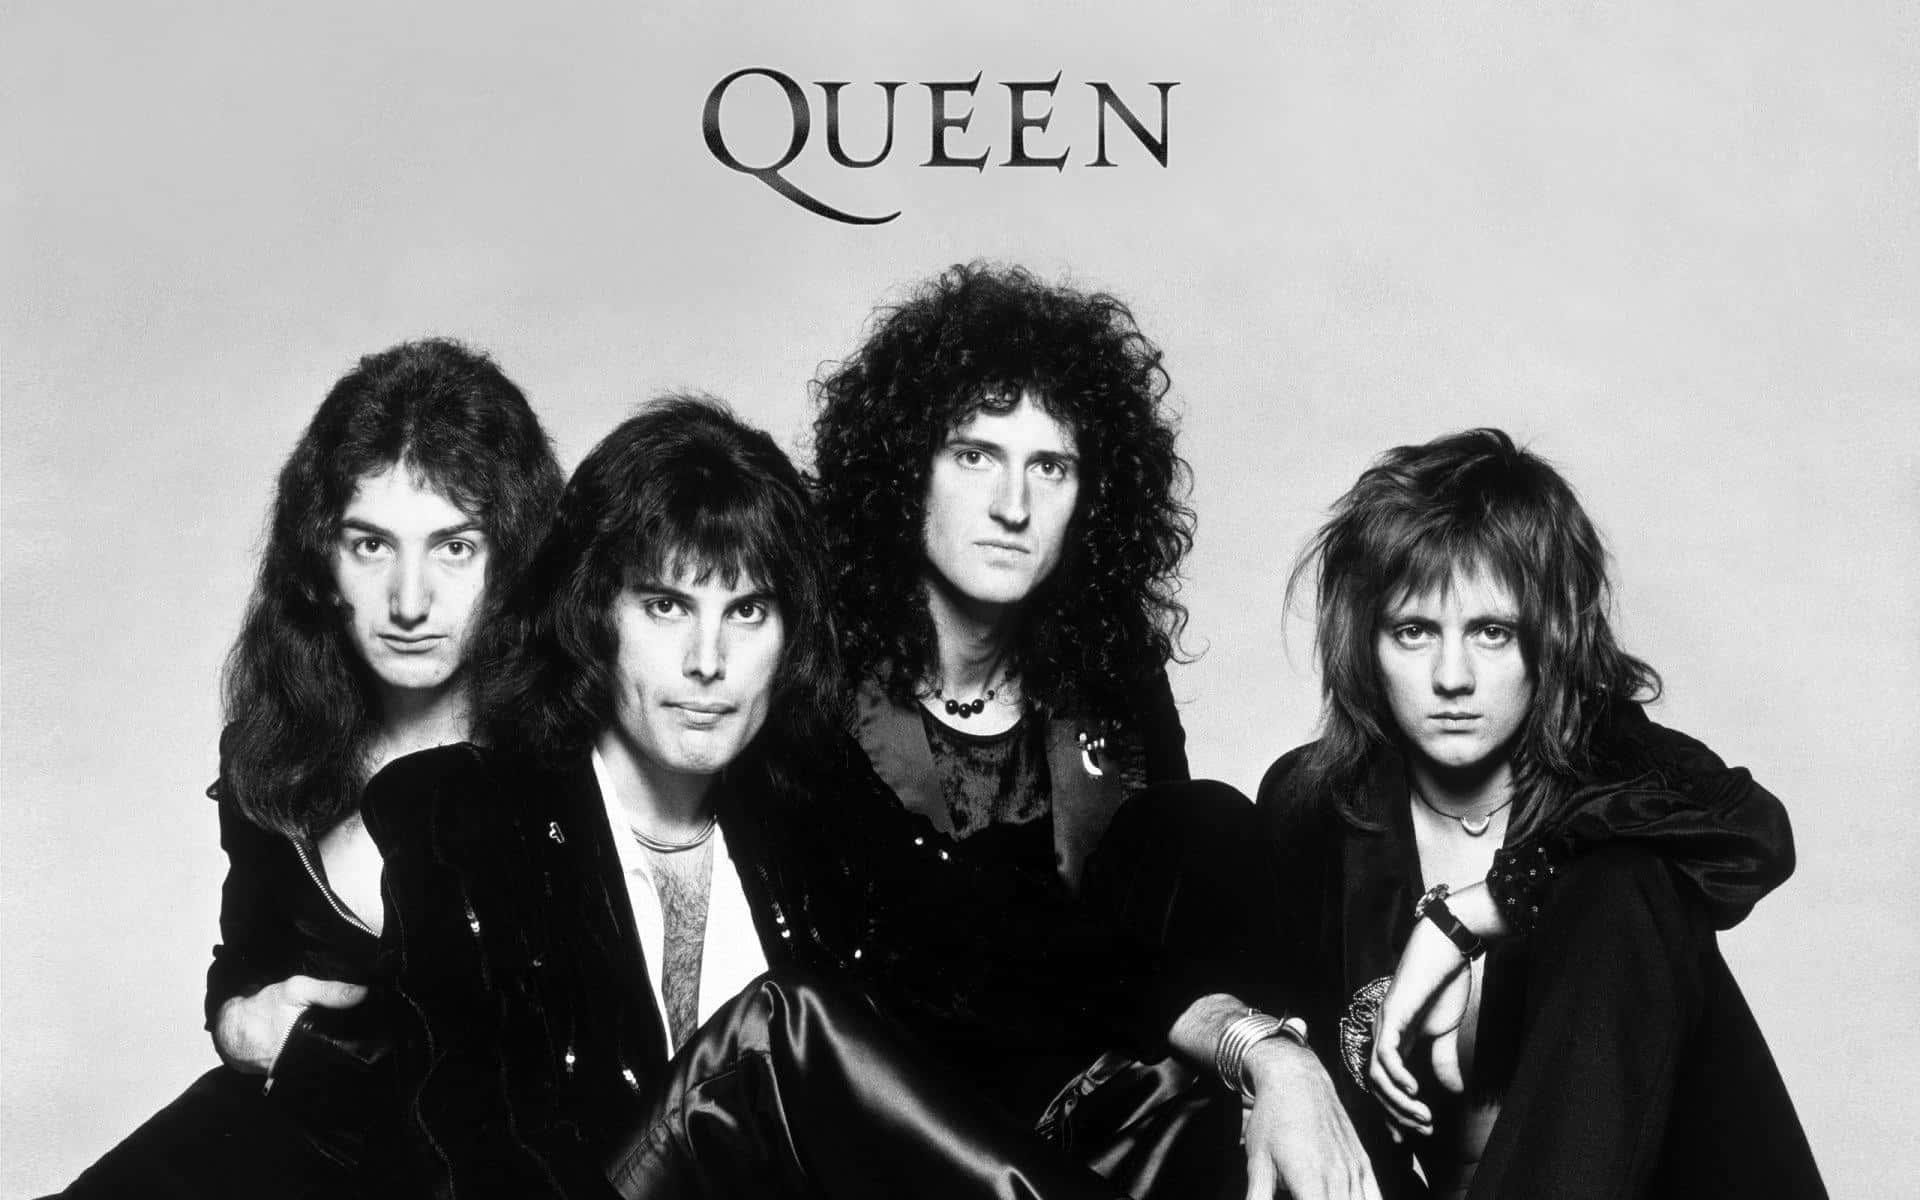 Queen in their classic line-up; Freddie Mercury, John Deacon, Brian May and Roger Taylor